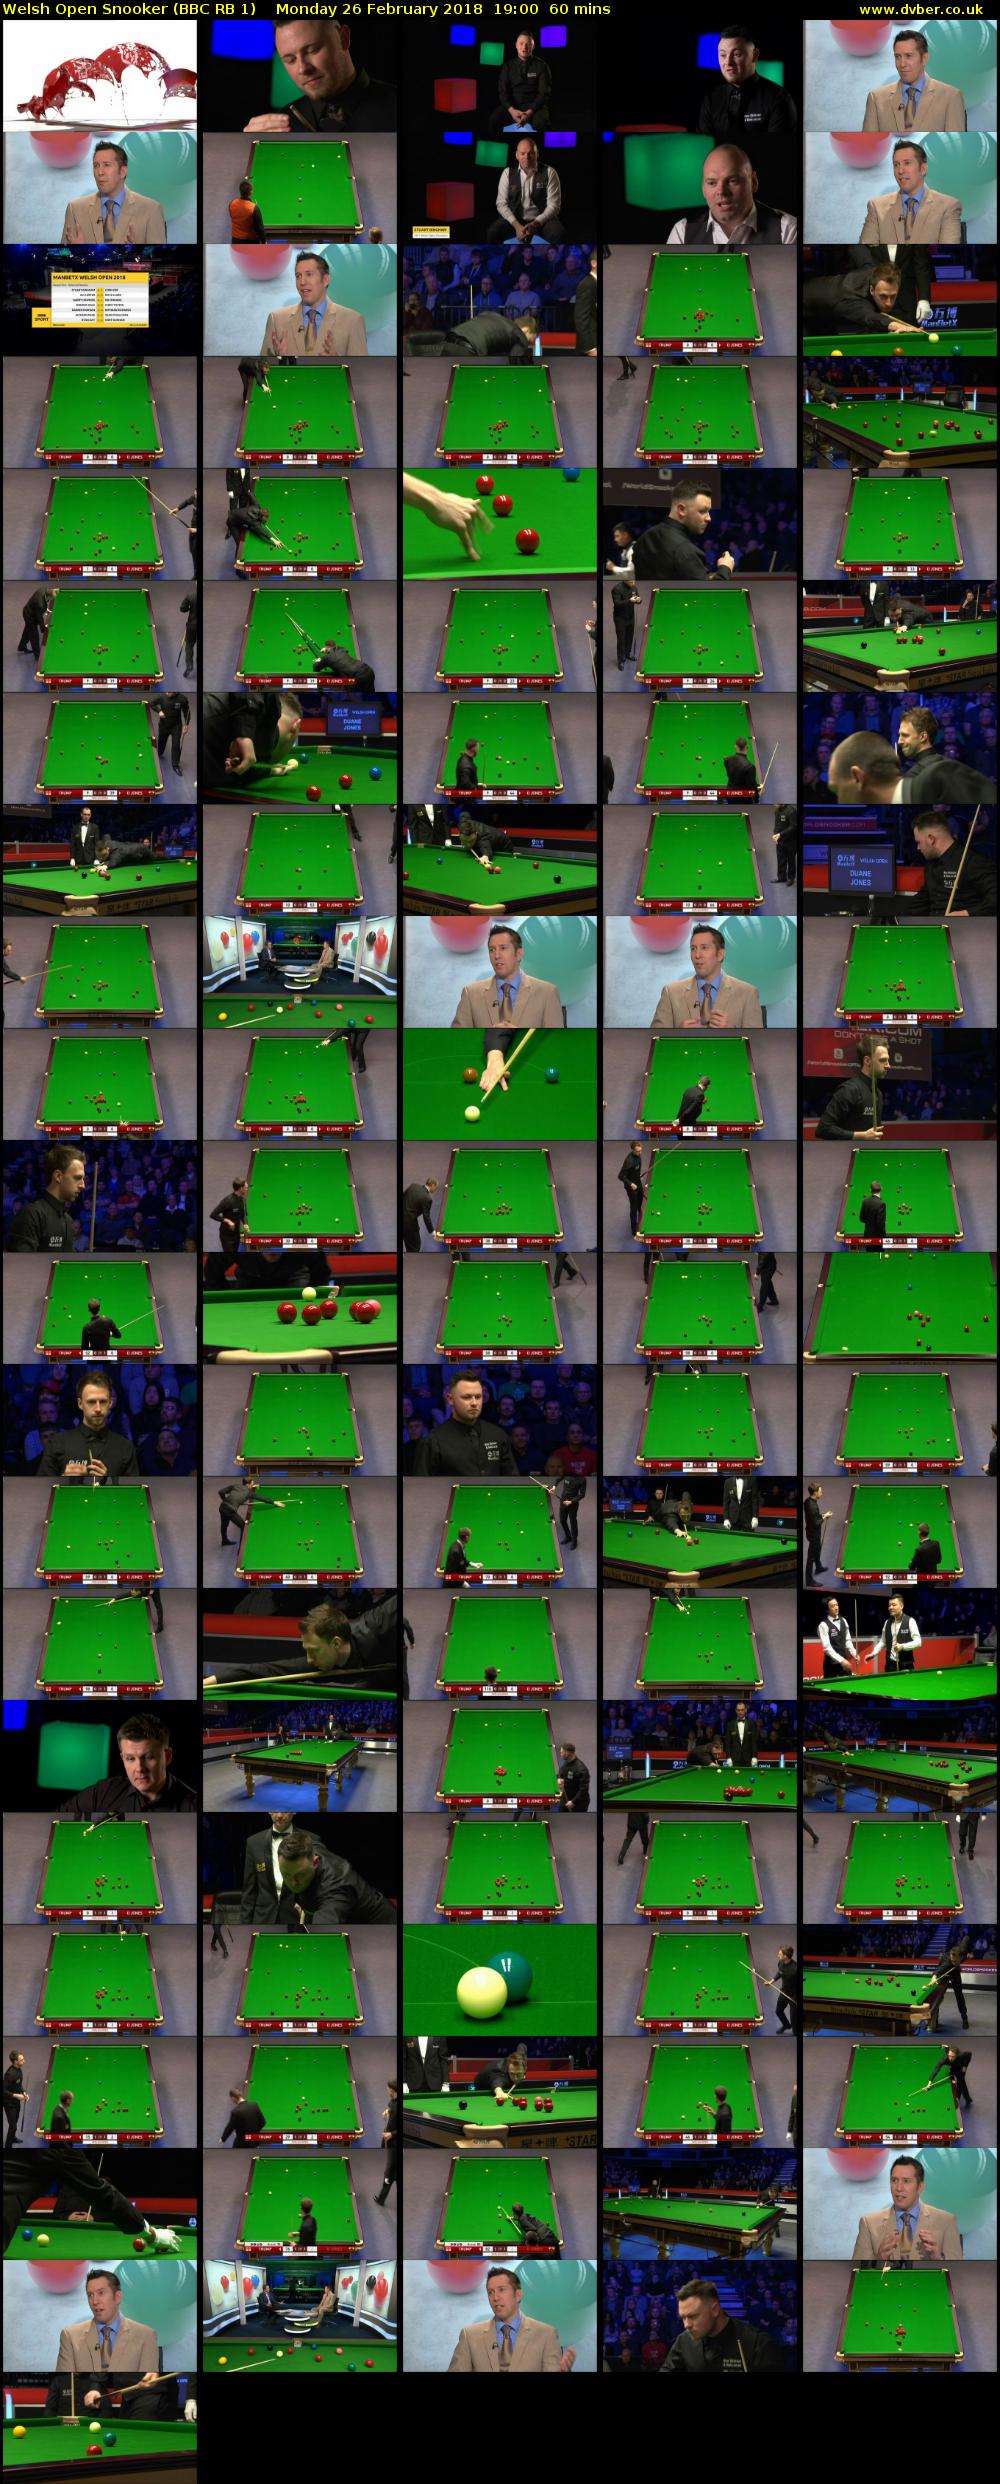 Welsh Open Snooker (BBC RB 1) Monday 26 February 2018 19:00 - 20:00